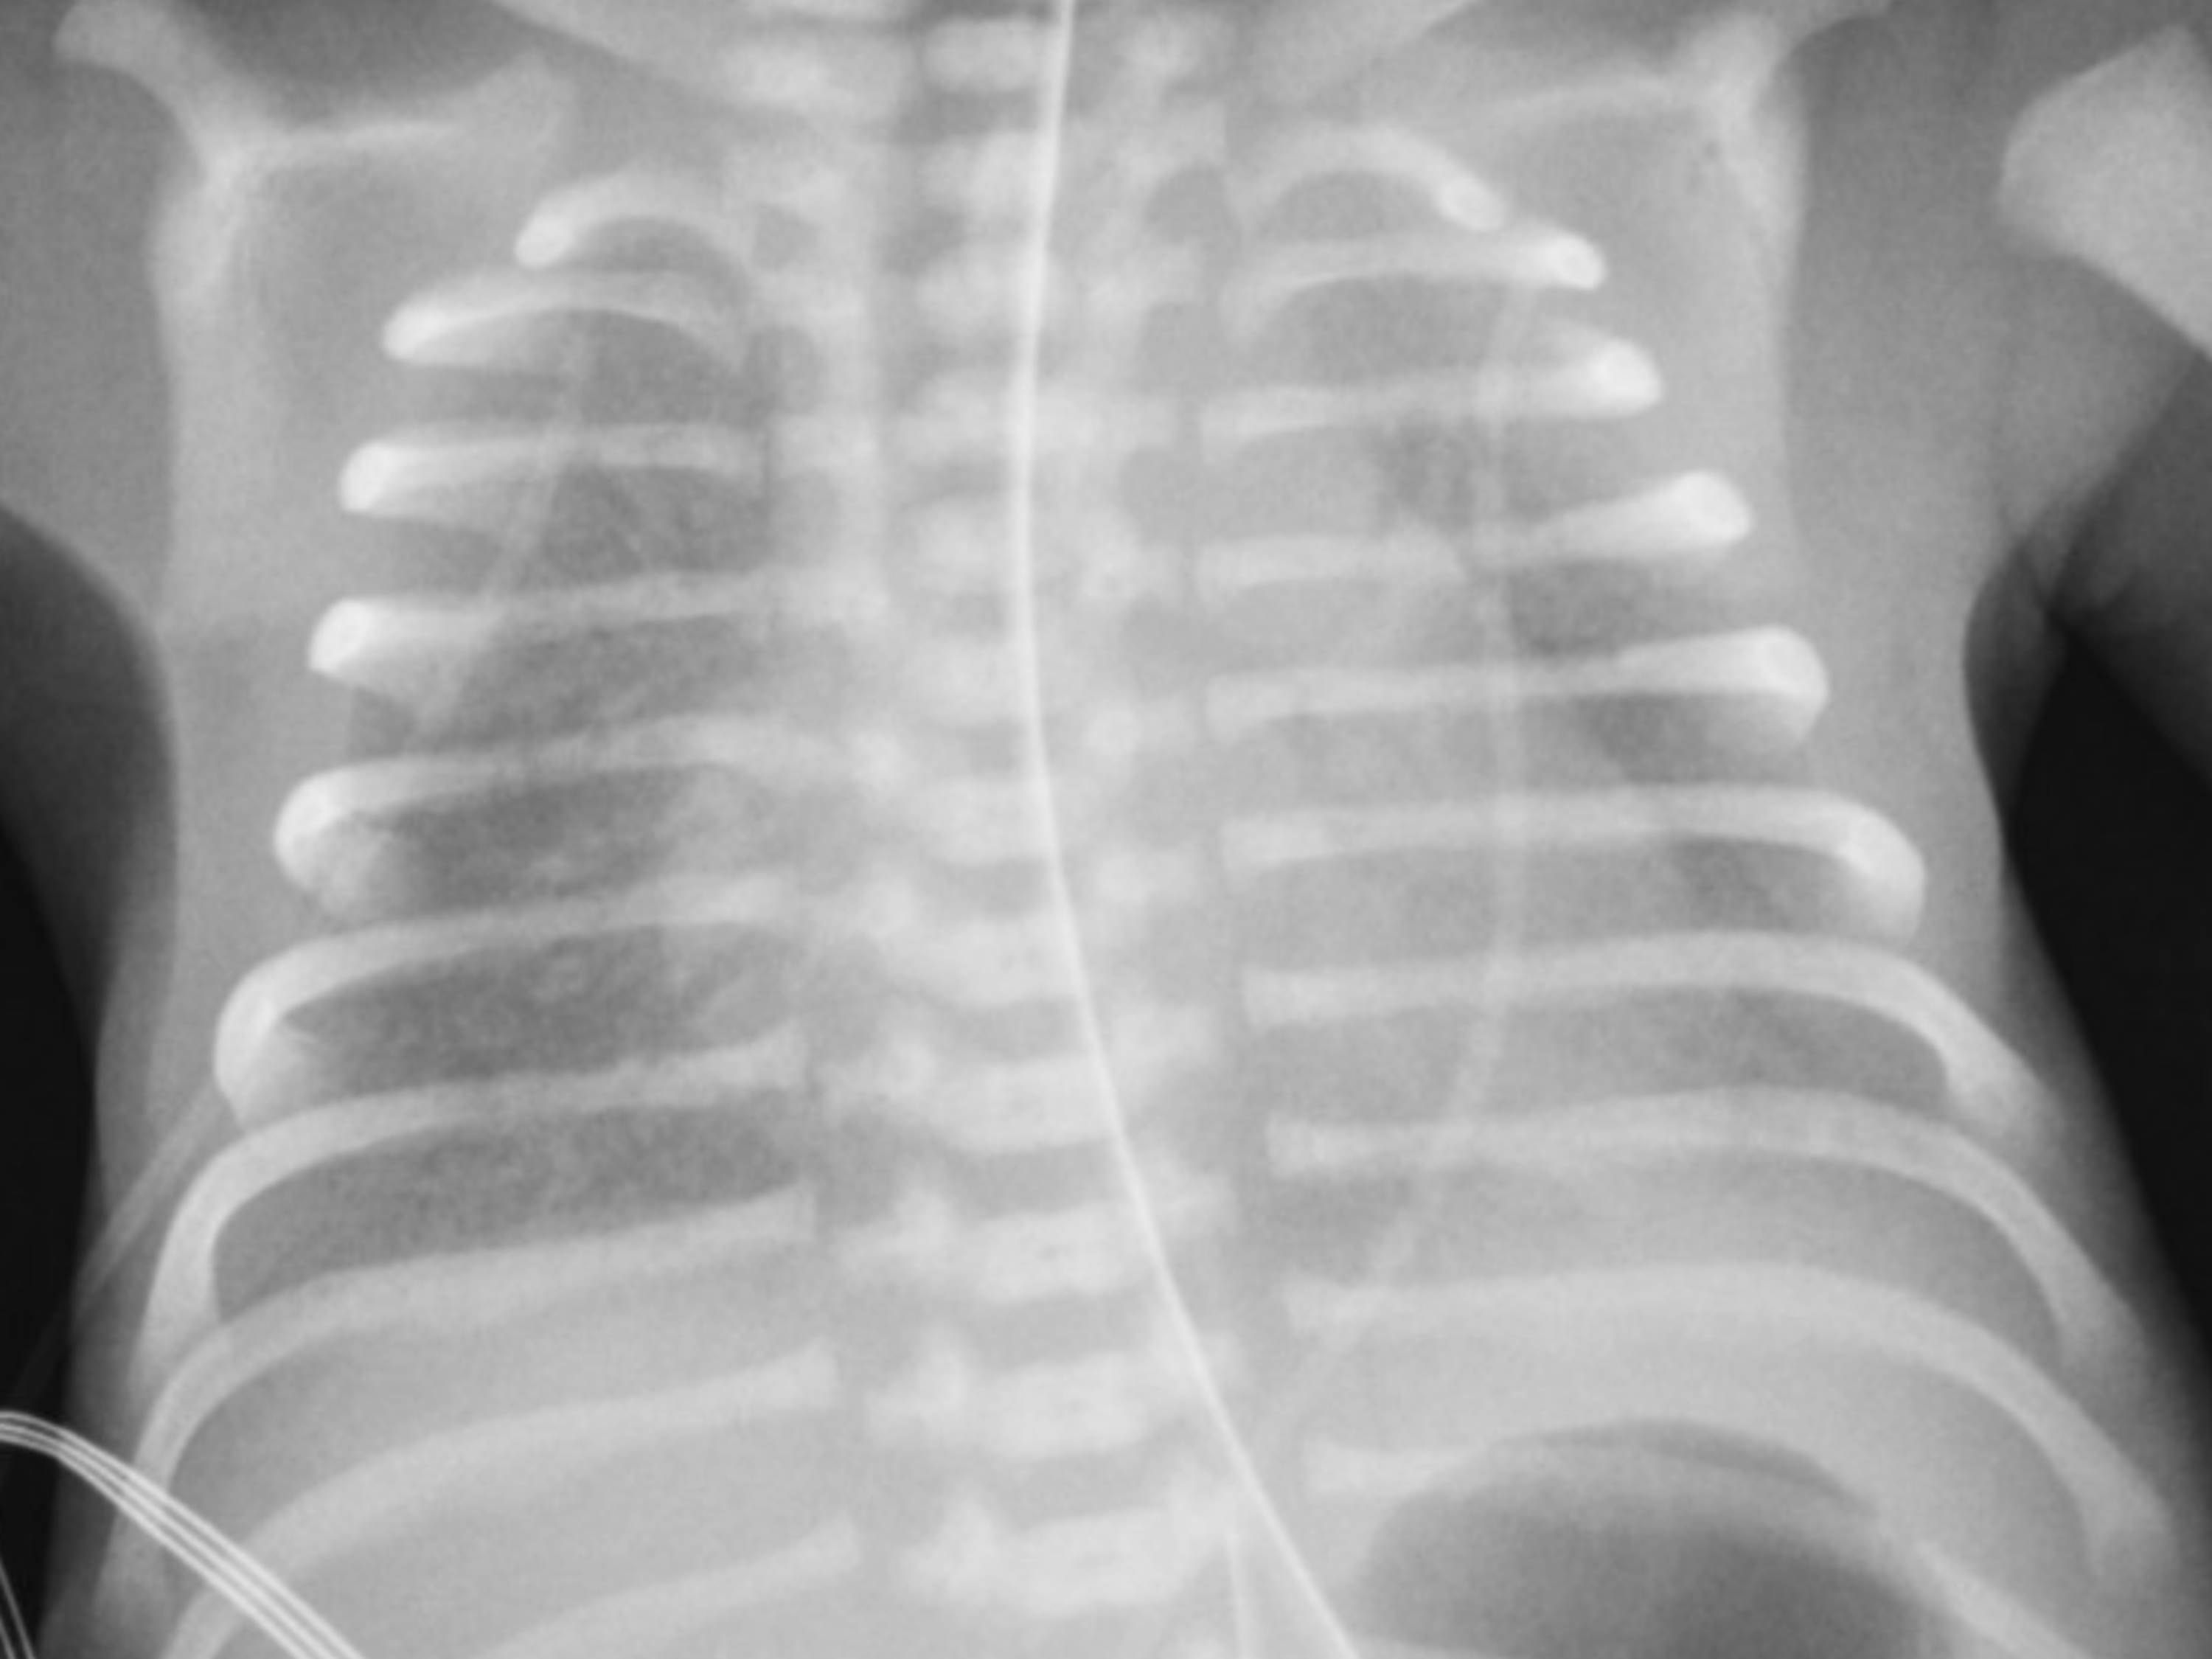 This is a chest radiograph of a preterm neonate with respiratory distress syndrome showing diffuse ground glass haziness bilaterally with air bronchograms